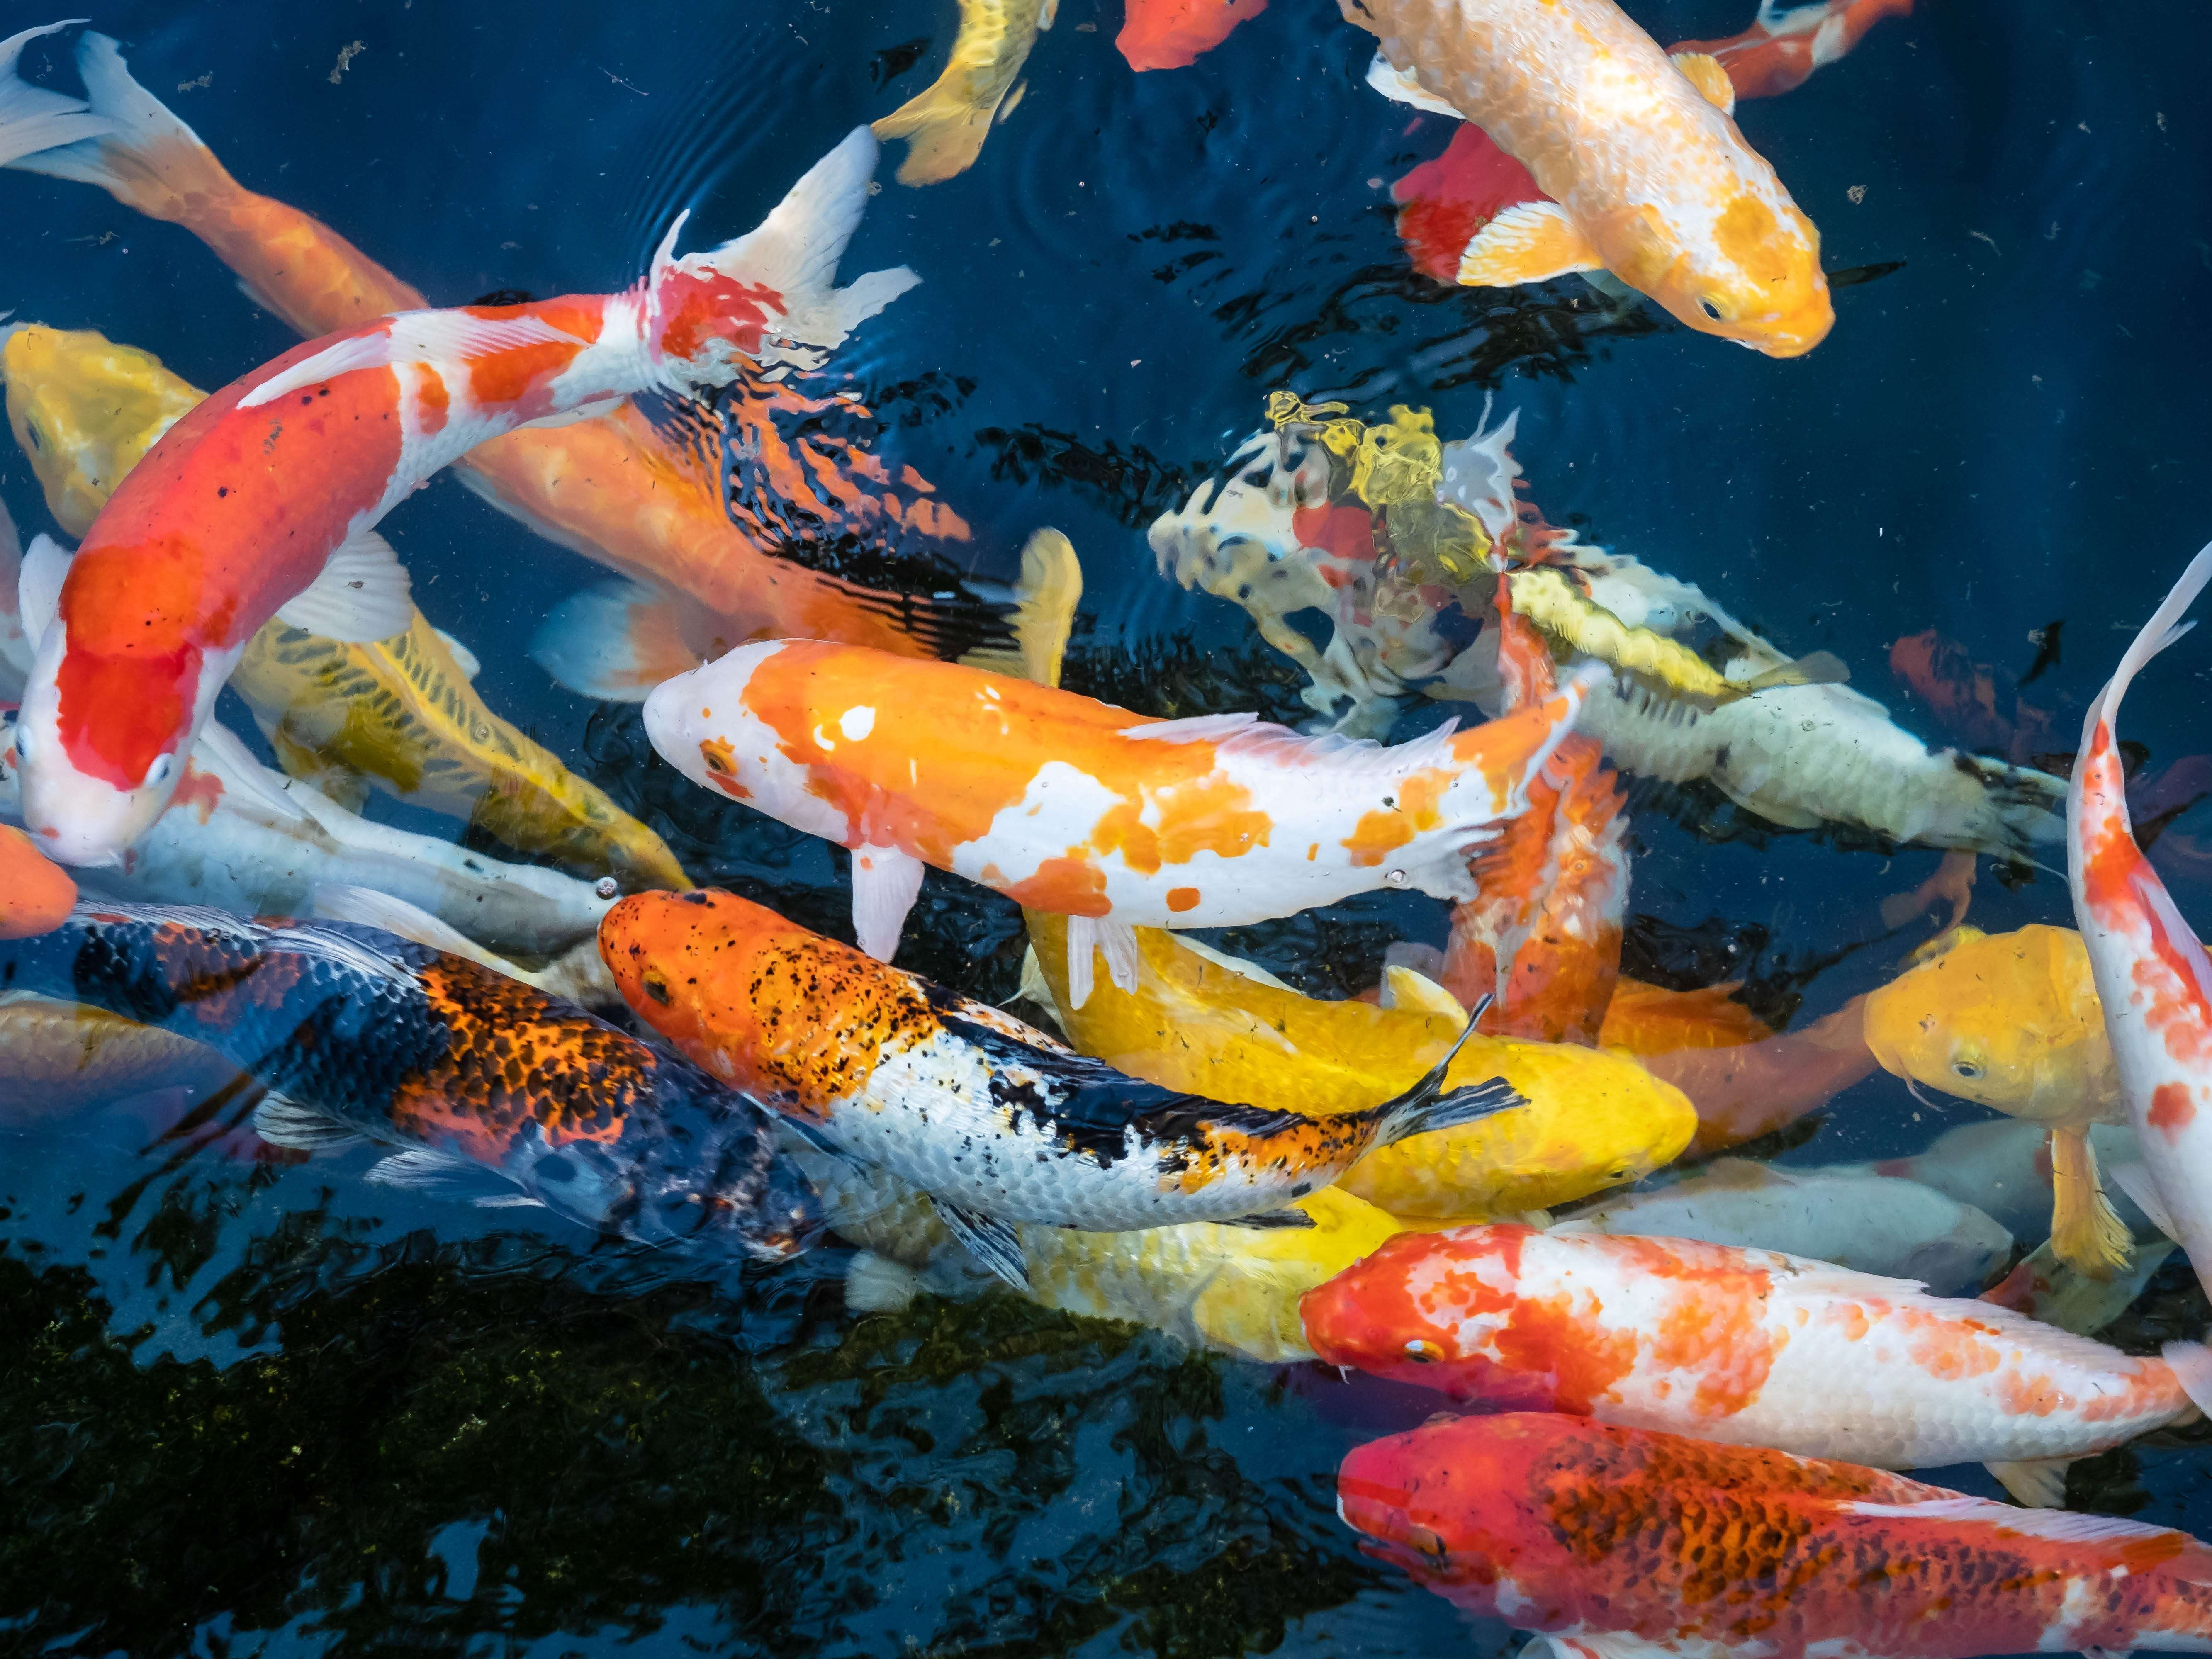 A koi fish seller says business is booming, thanks to his careful